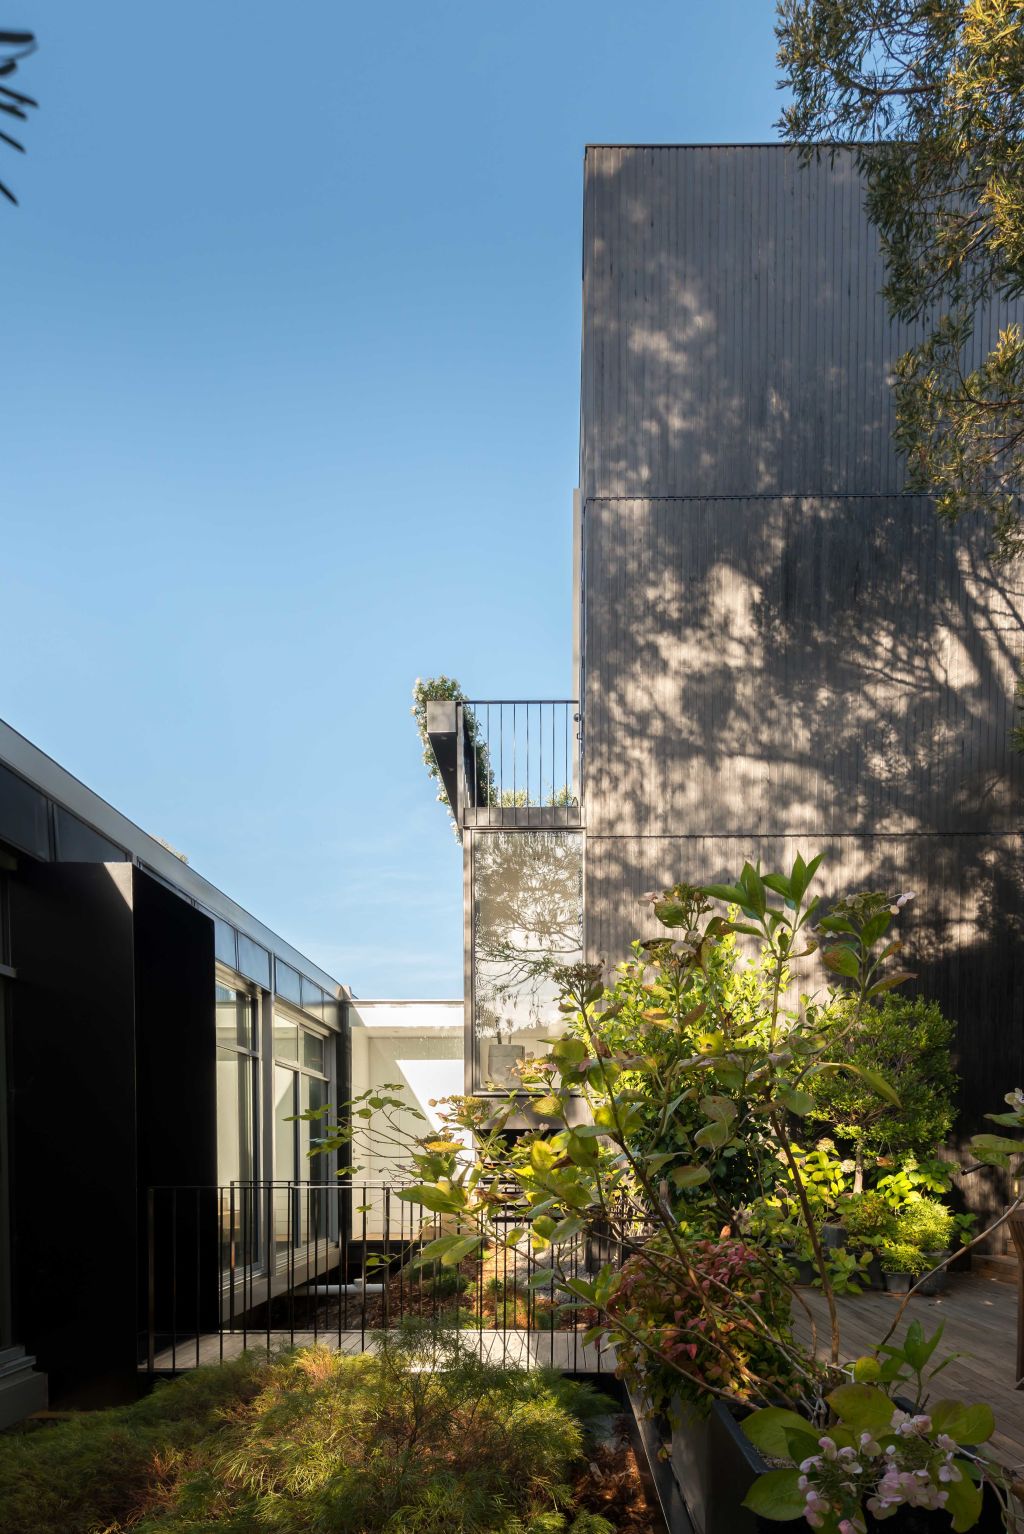 A connected but self-contained home is chic housing for a family matriarch. Photo: Matt Sansom